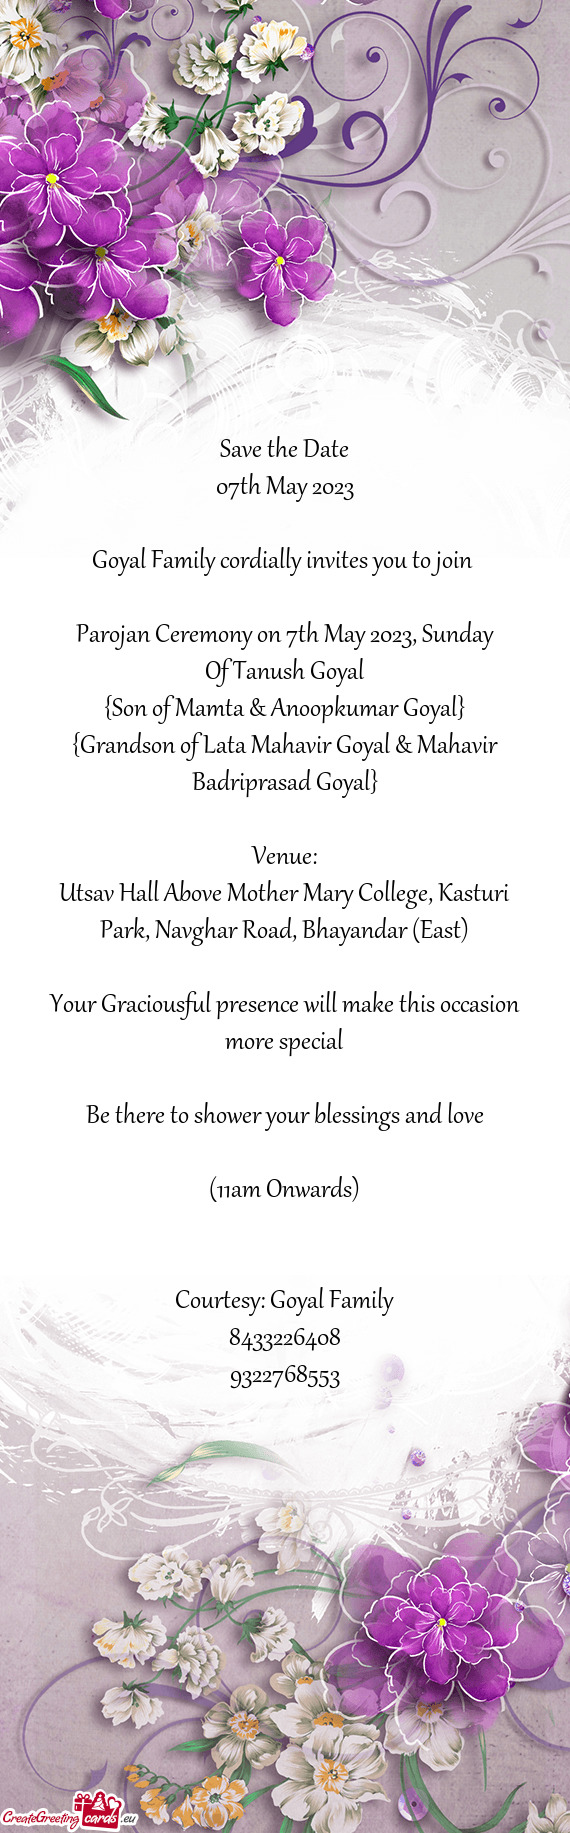 Goyal Family cordially invites you to join